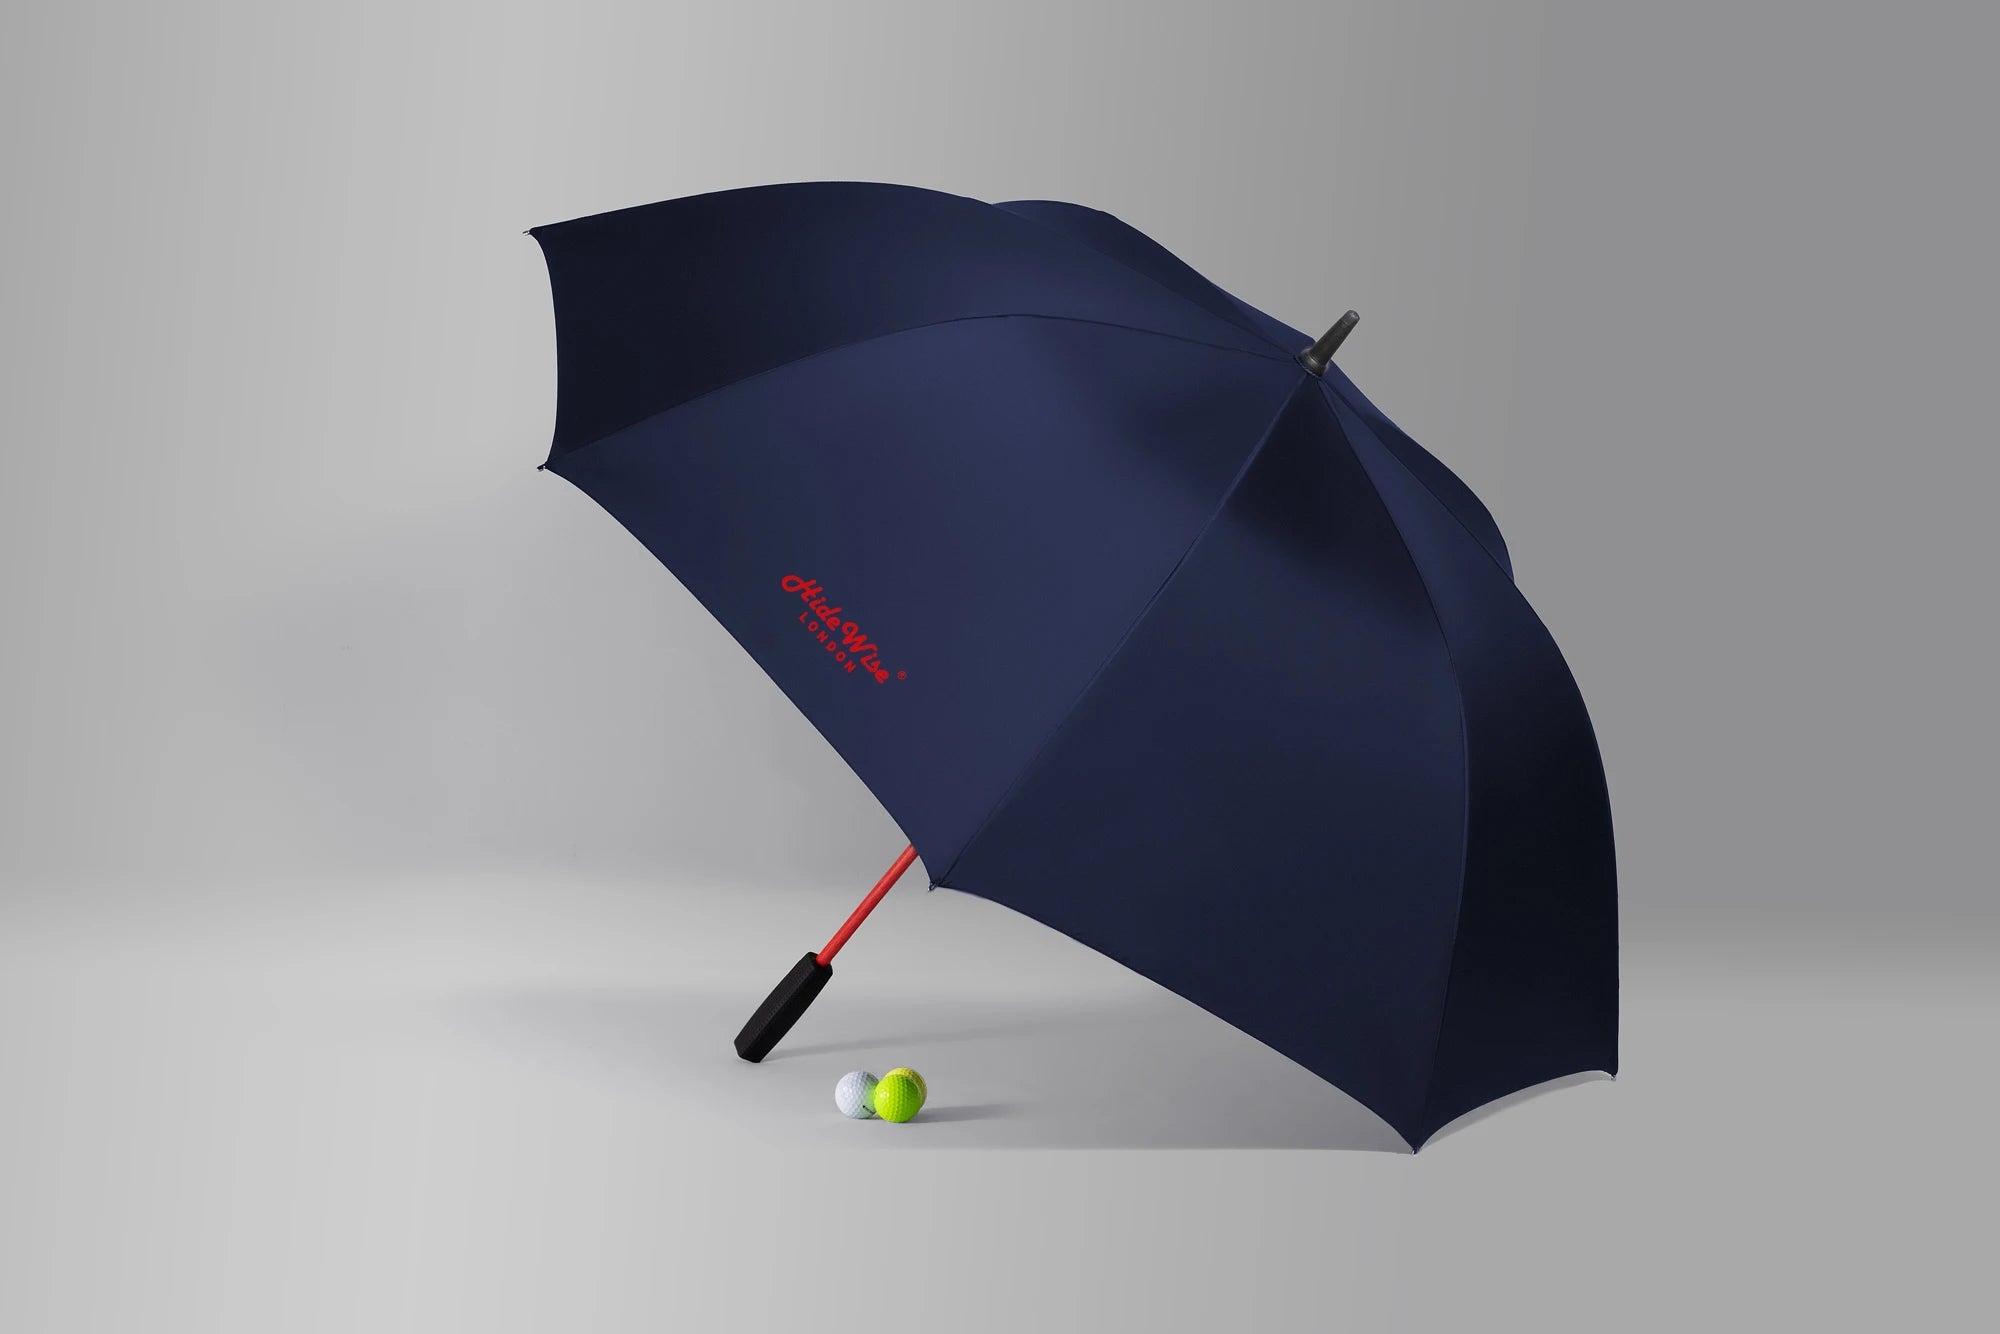 Hidewise-london-premium-quality-luxury-brand-golf-umbrella-gift-strong-sturdy-wind-proof-gust-proof-blue-blu-red-brolly